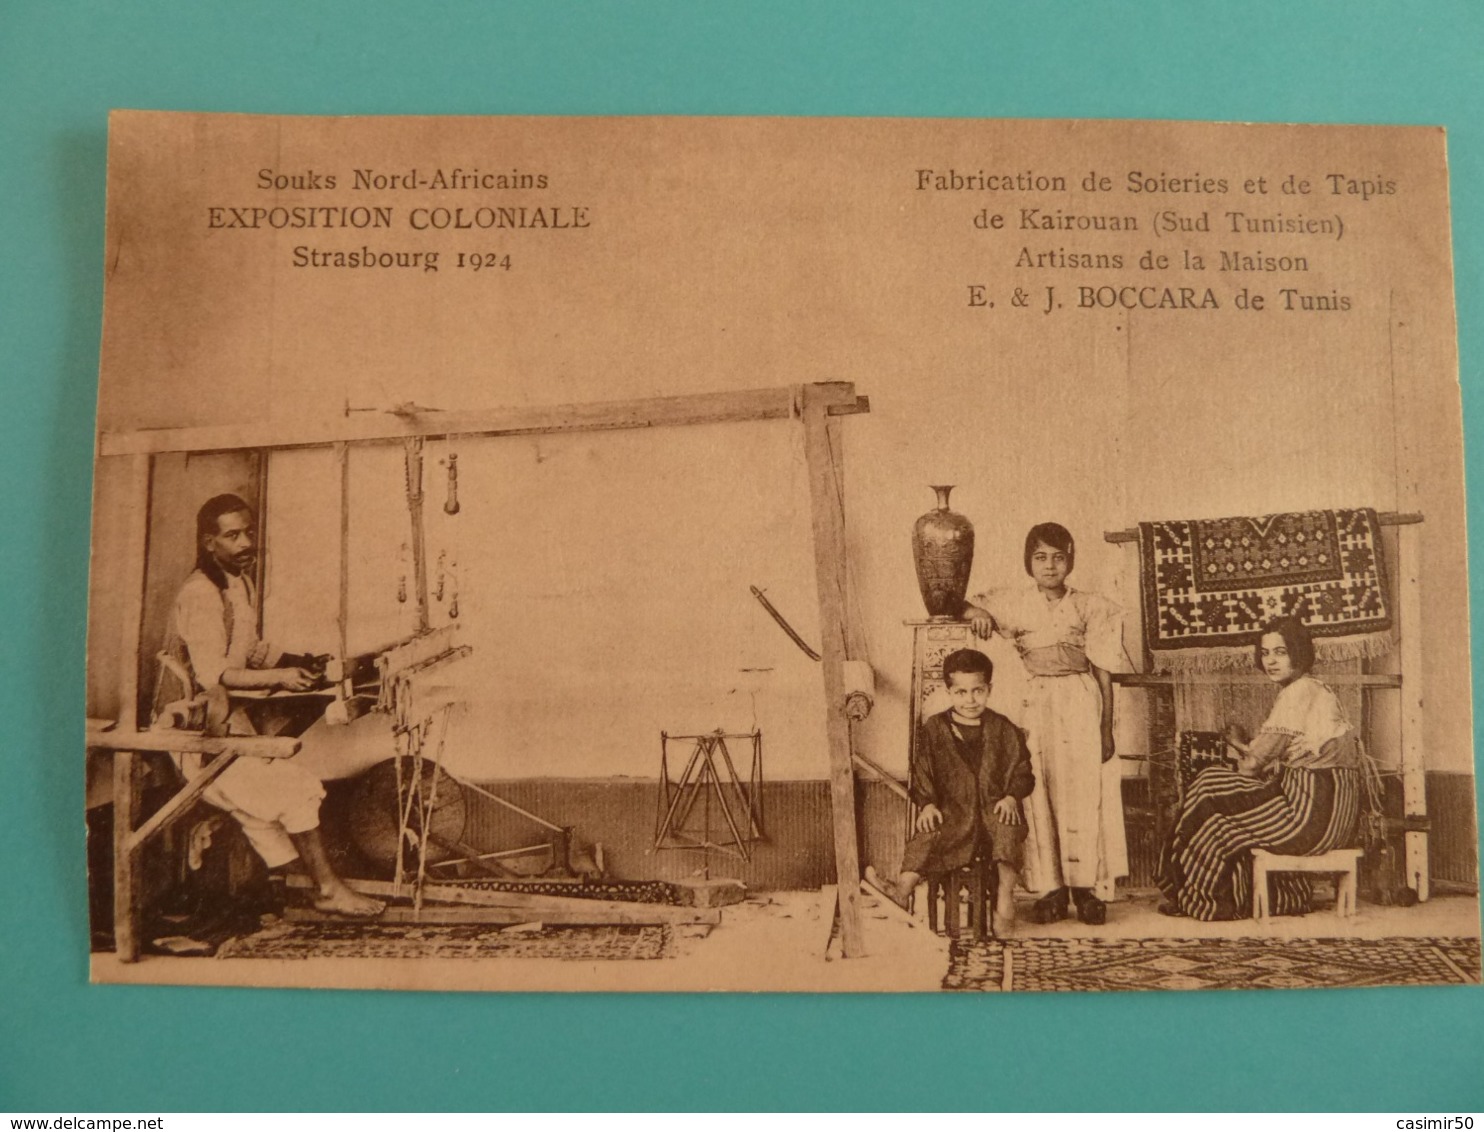 EXPOSITION COLONIALE STRASBOURG 1924 SOUKS NORD AFRICAINS - Exhibitions